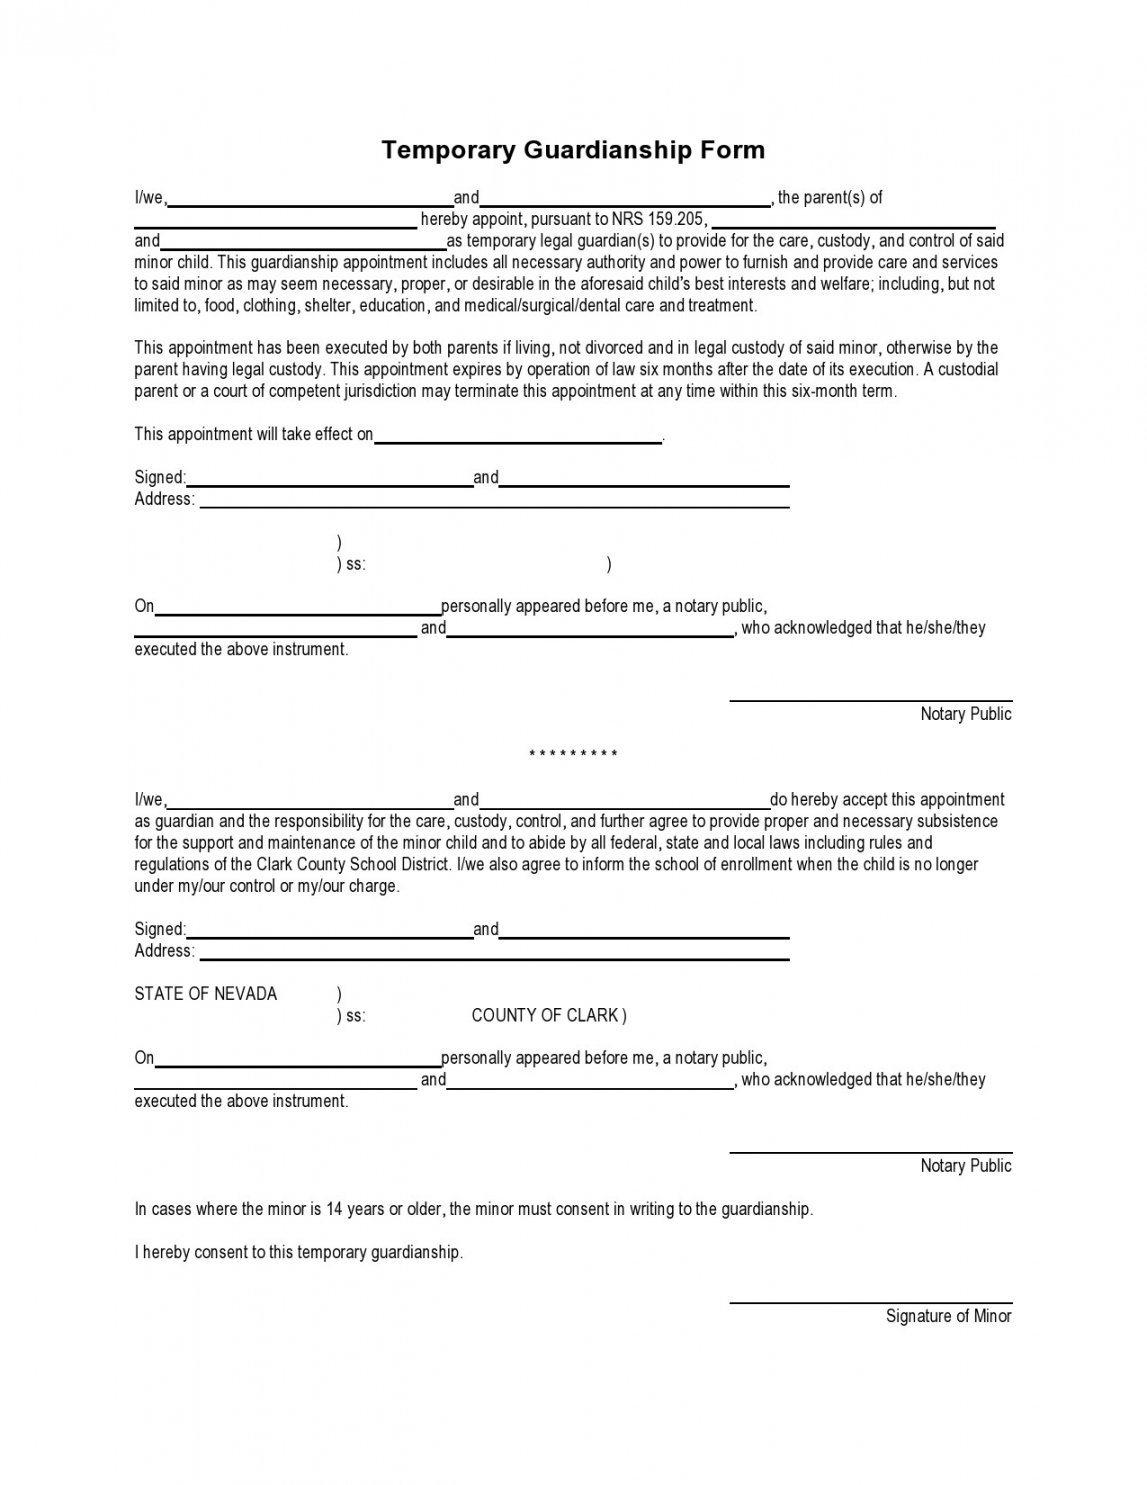 Printable Temporary Guardianship Forms [All States] ᐅ - FREE Printables - Free Printable Child Guardianship Forms In Case Of Death